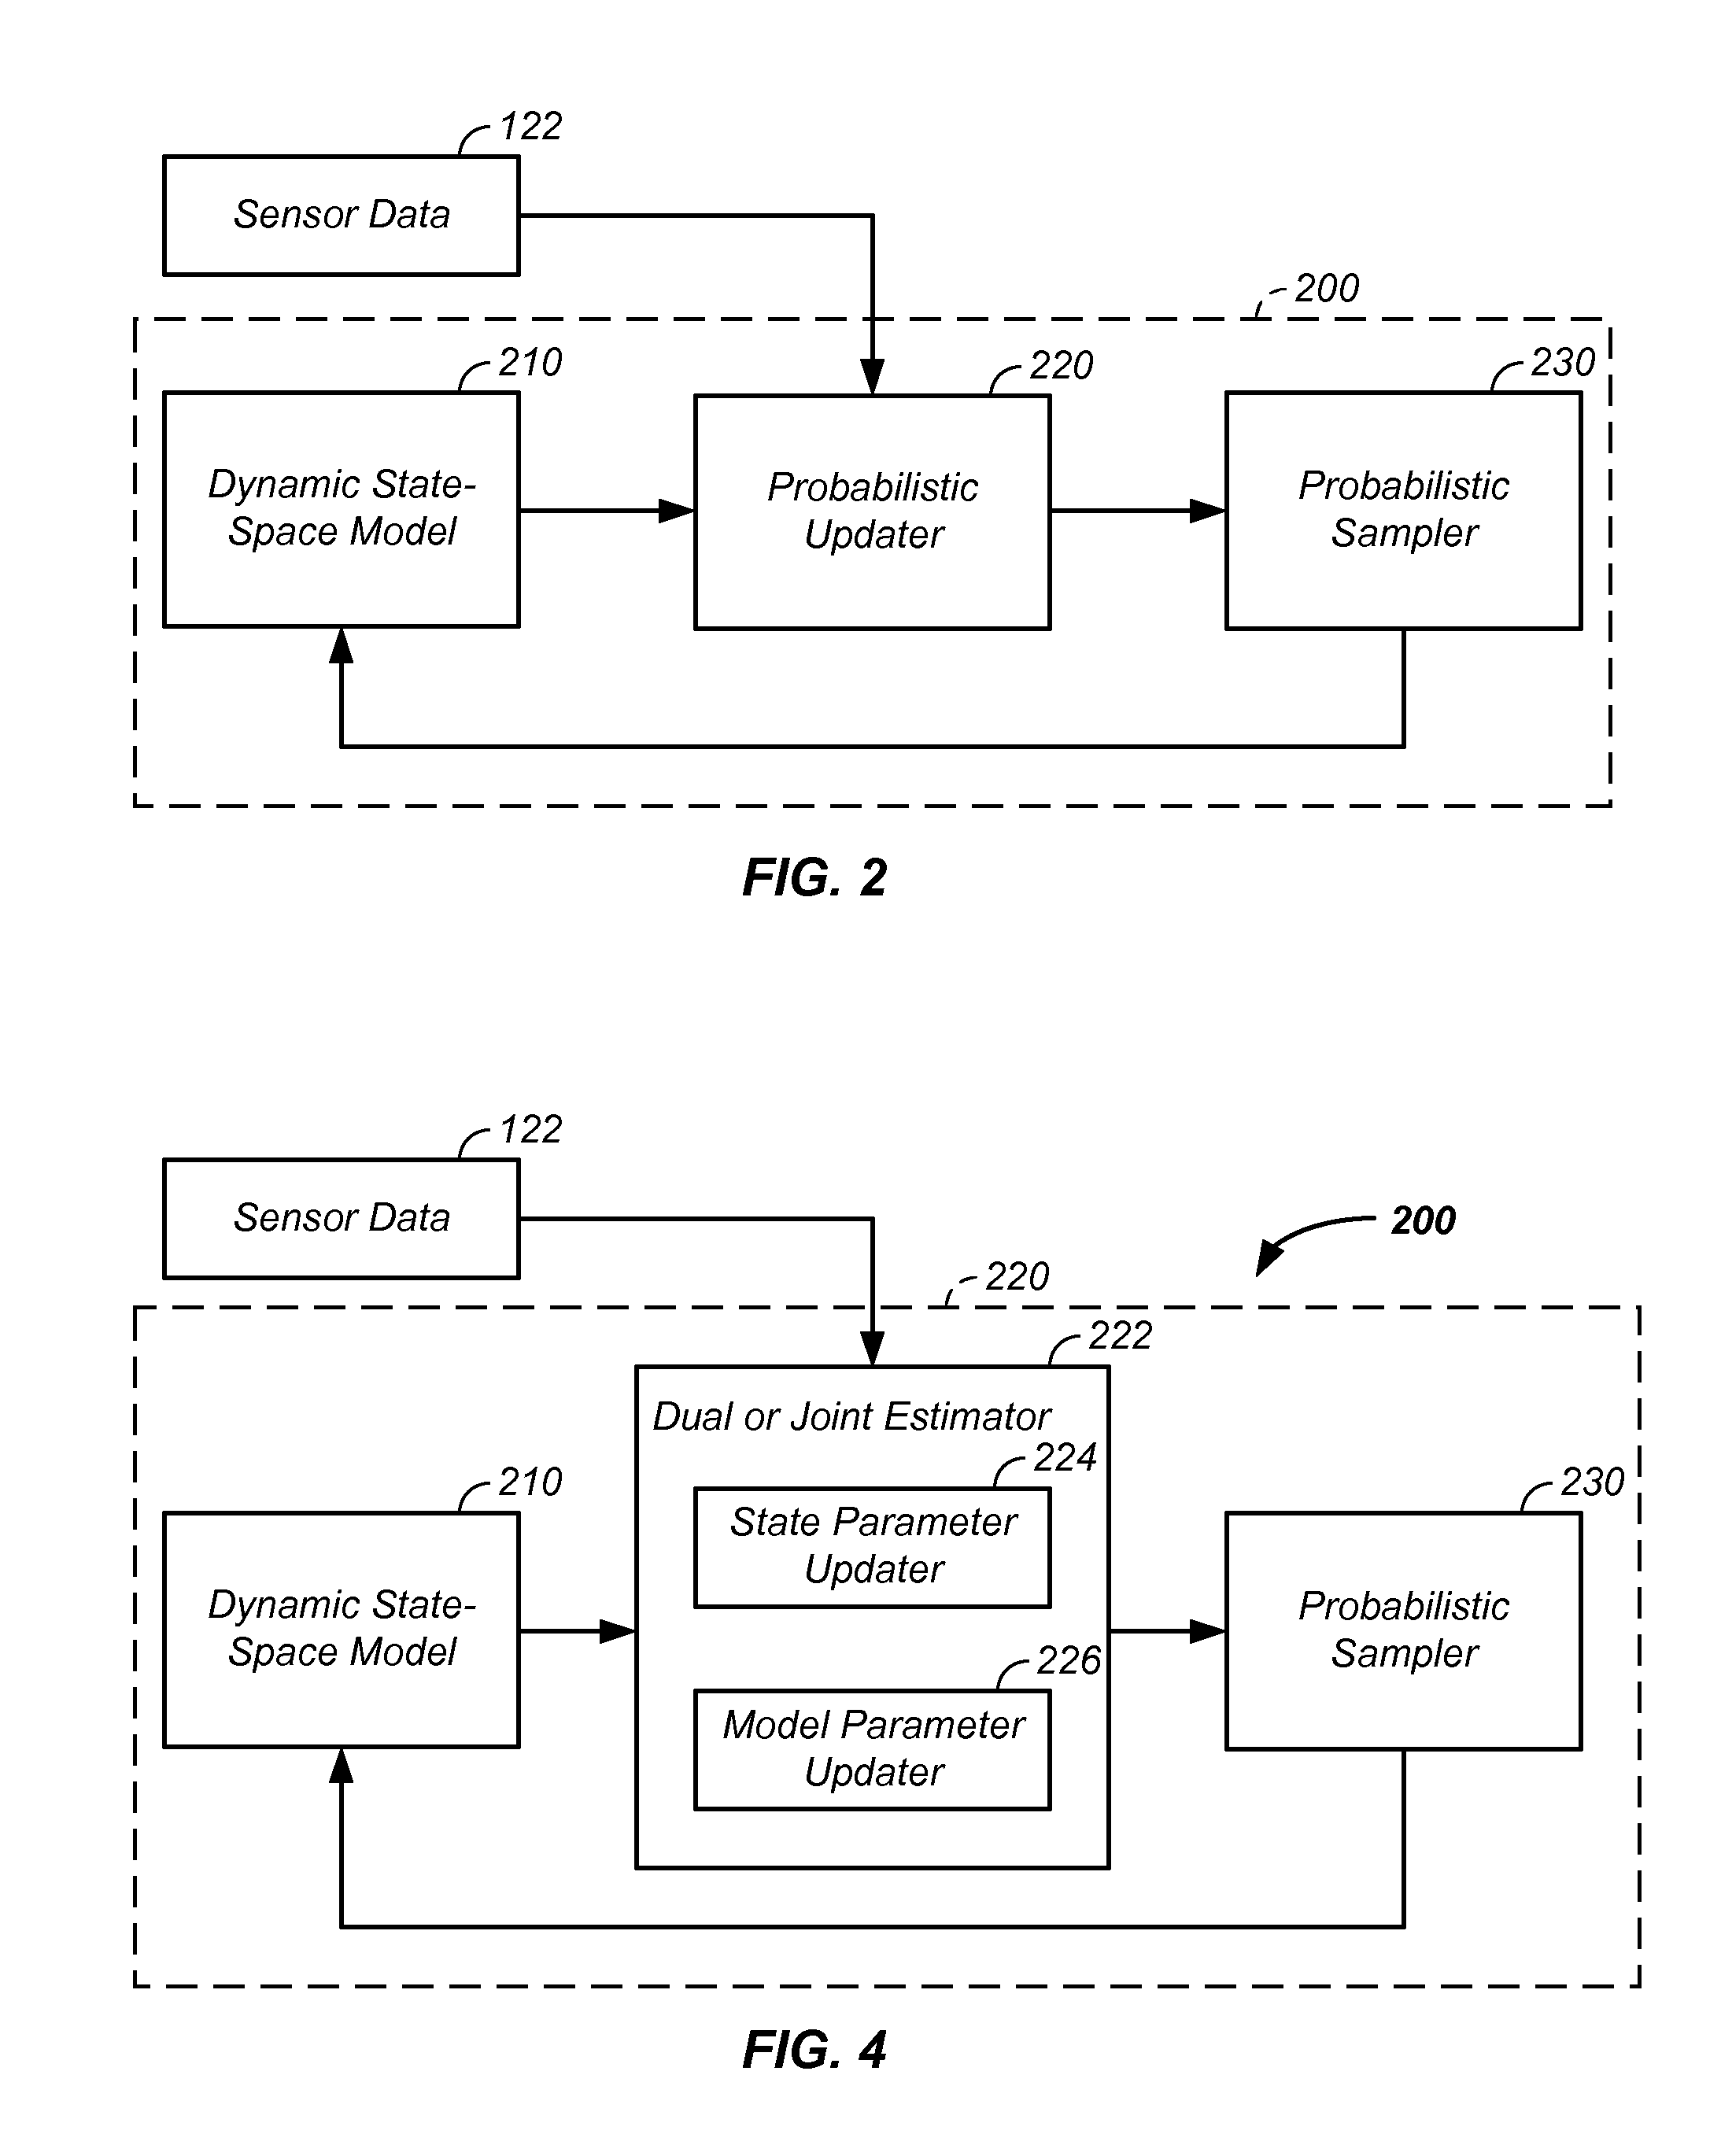 Iterative probabilistic parameter estimation apparatus and method of use therefor